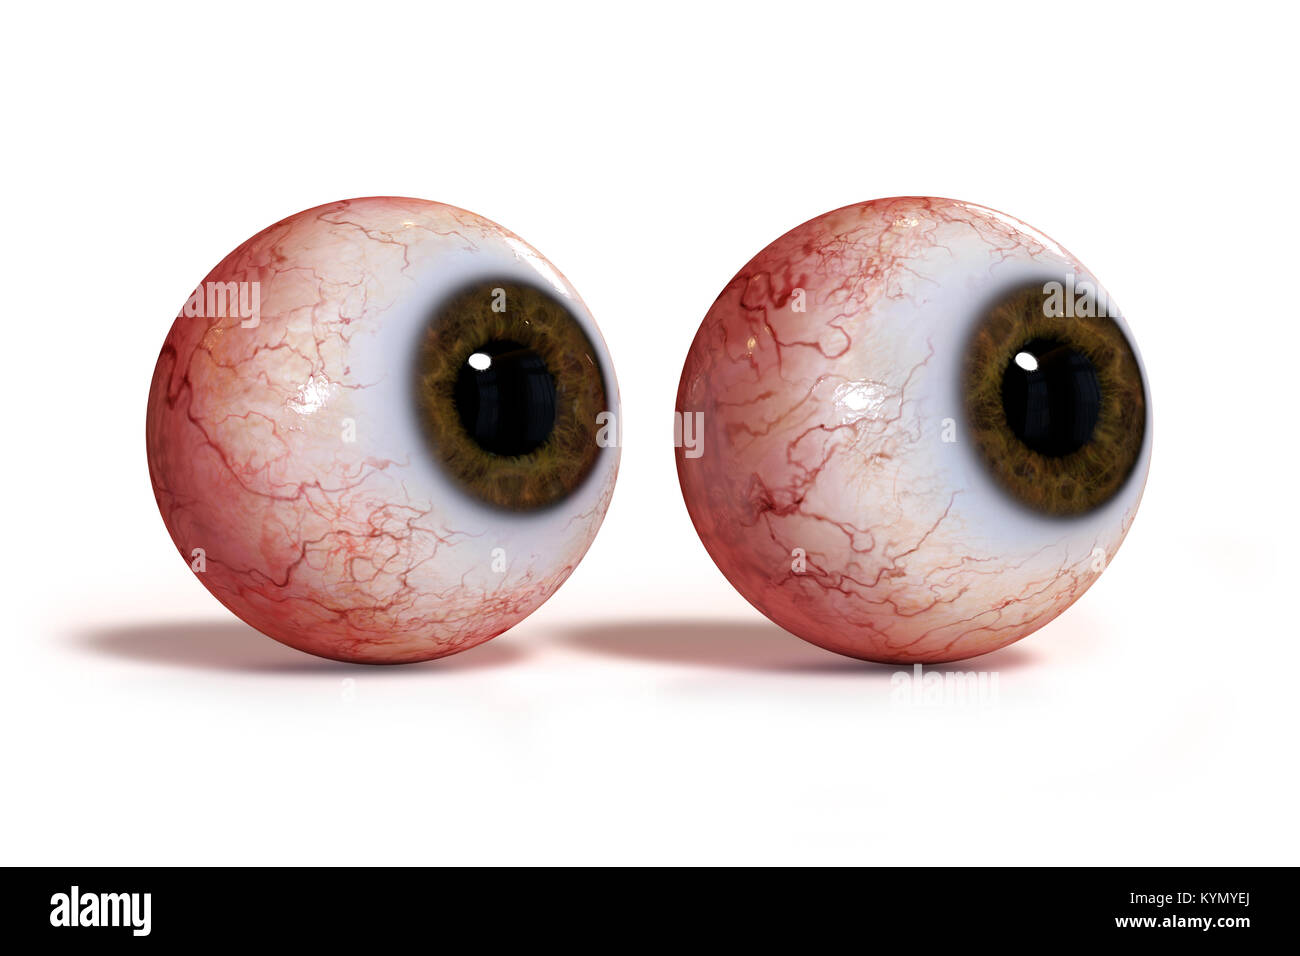 28 Googly Eyes High Res Illustrations - Getty Images